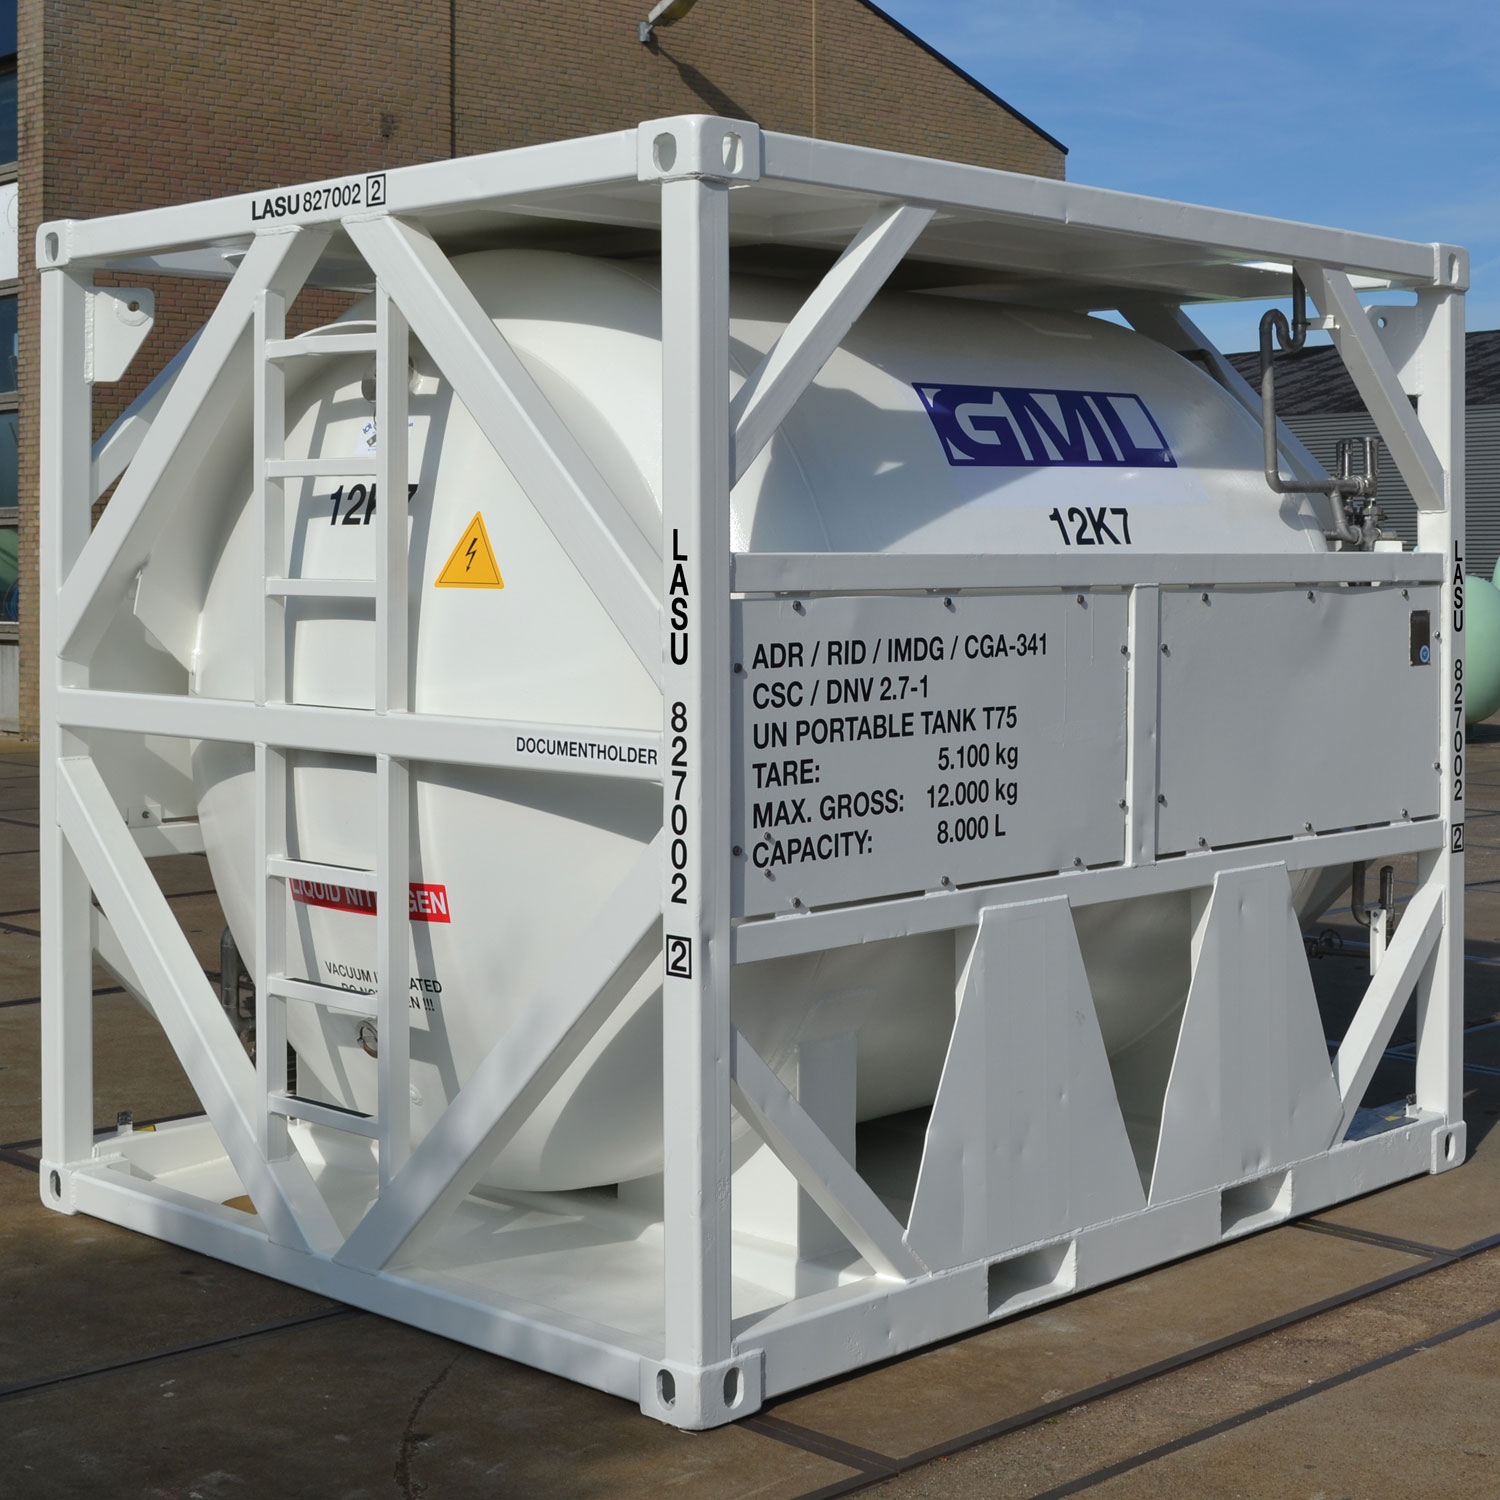 DNV 8' x 10' Insulated Container